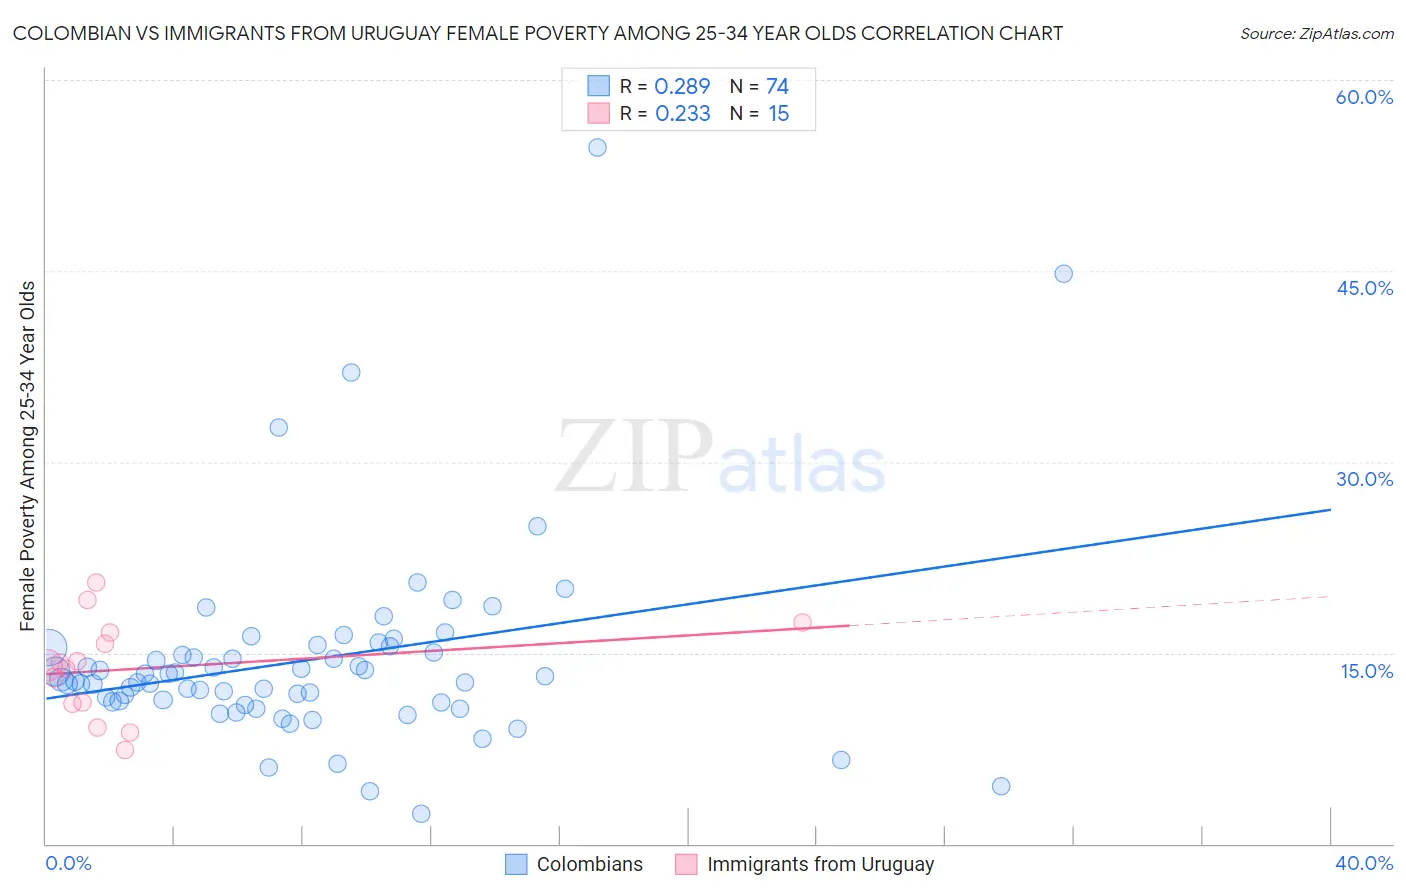 Colombian vs Immigrants from Uruguay Female Poverty Among 25-34 Year Olds